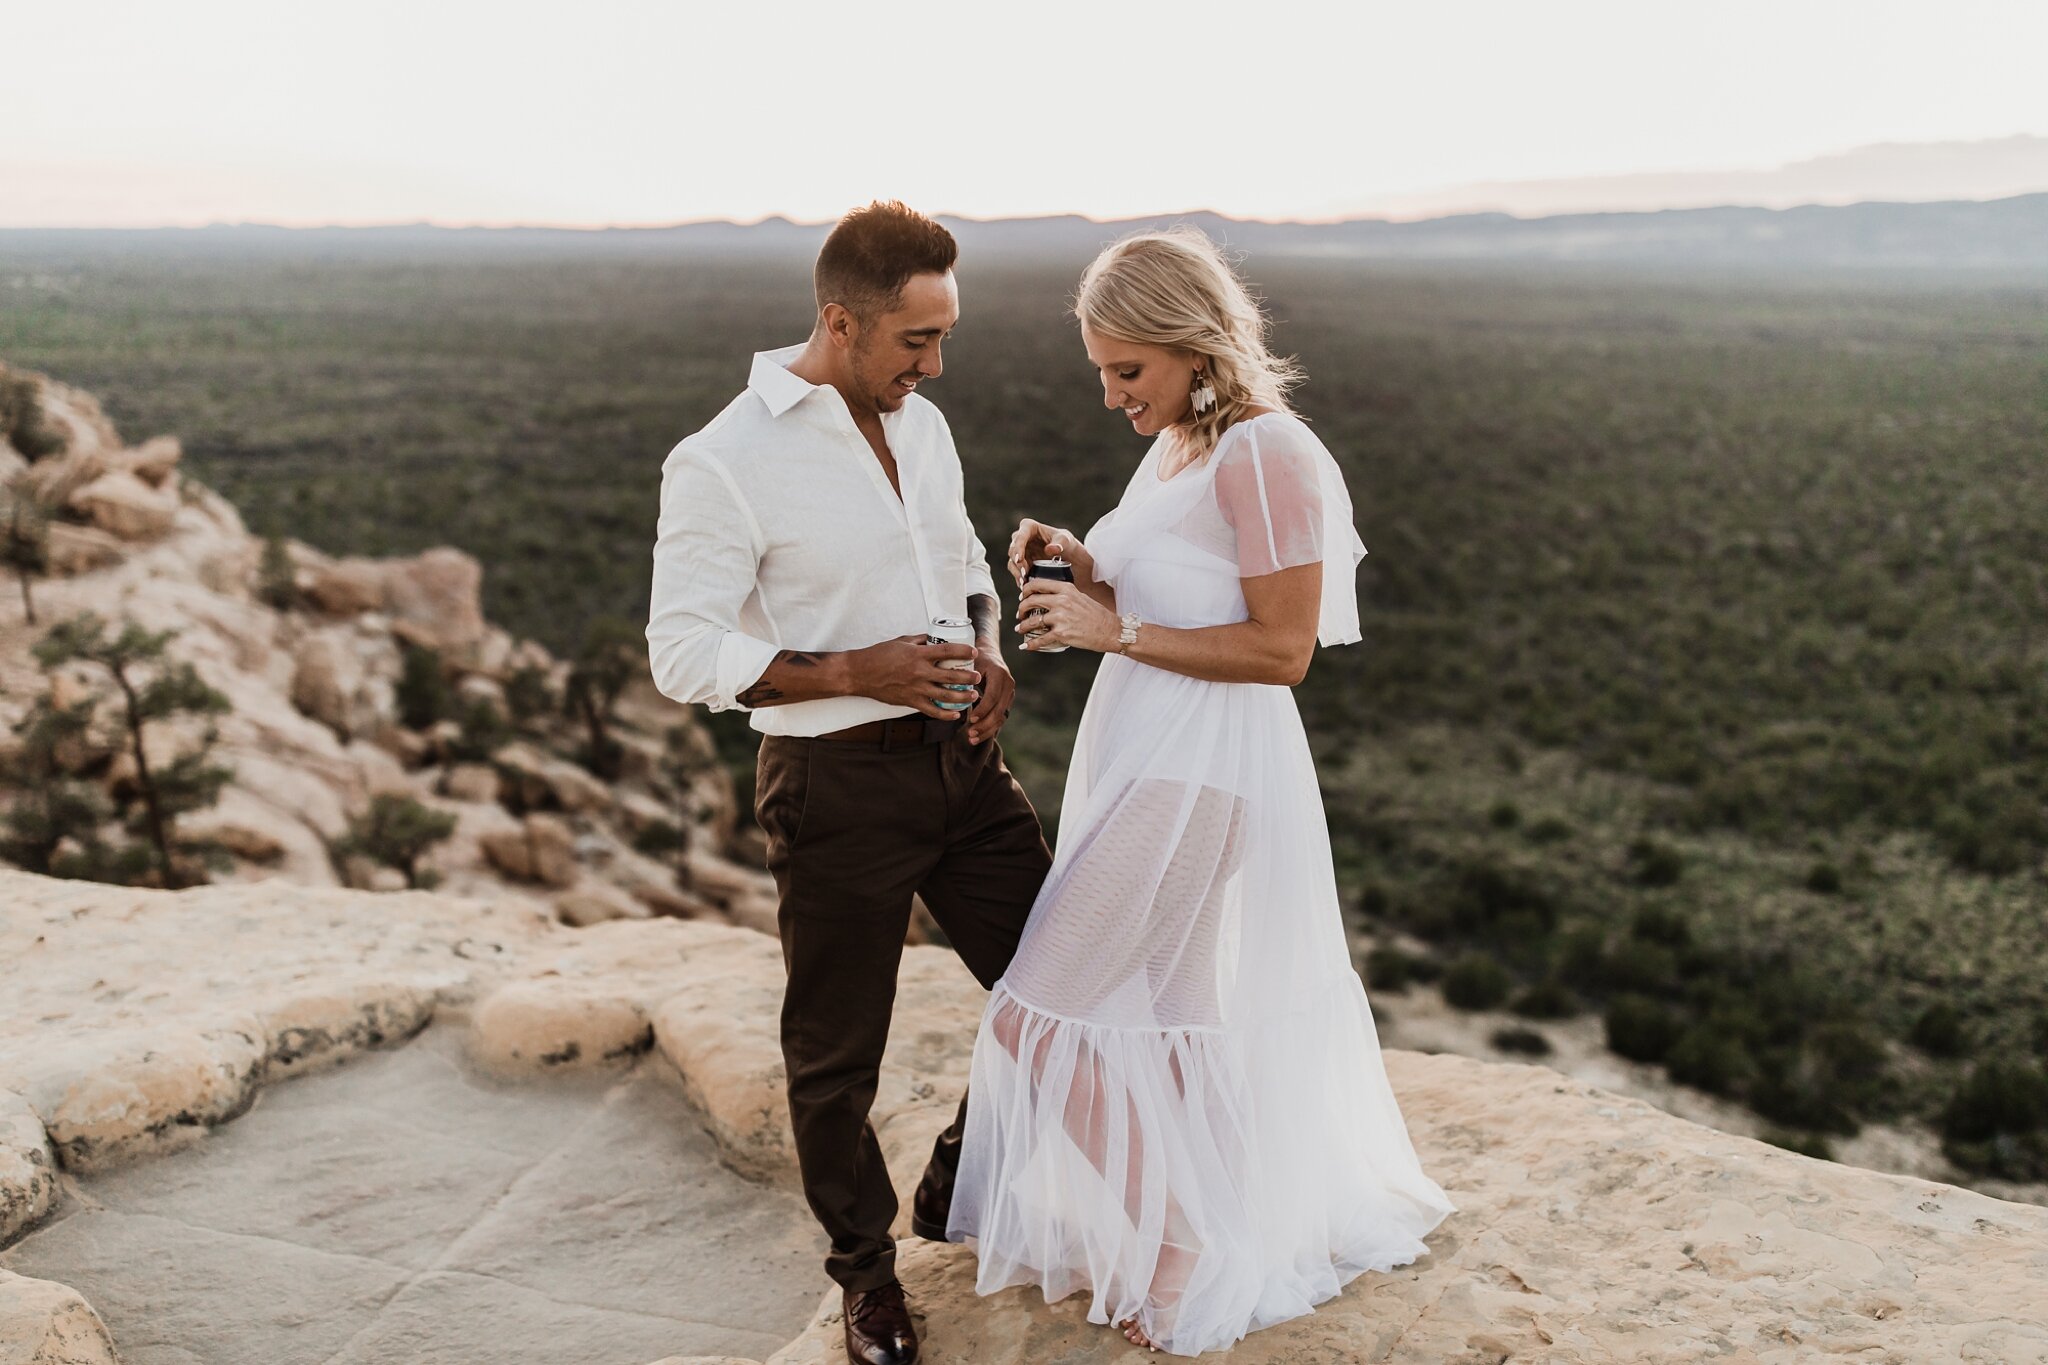 Alicia+lucia+photography+-+albuquerque+wedding+photographer+-+santa+fe+wedding+photography+-+new+mexico+wedding+photographer+-+new+mexico+wedding+-+anniversary+-+styled+anniversary+-+elopement+-+styled+elopement_0045.jpg